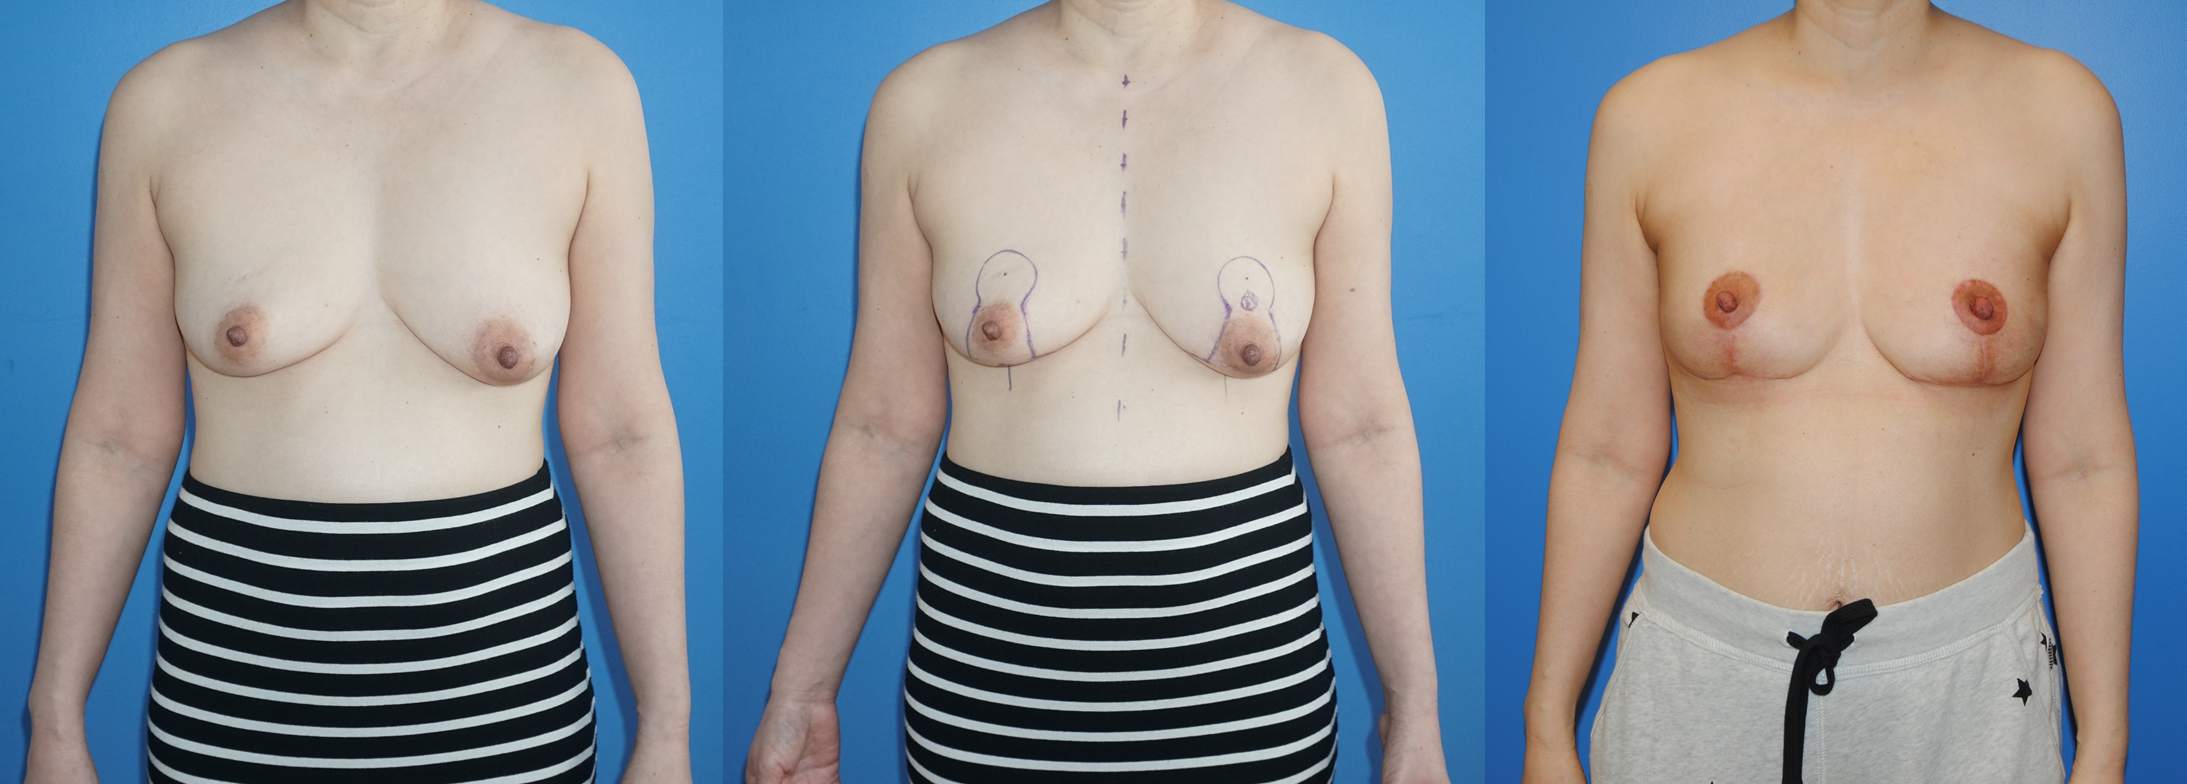 Closure of Breast Cancer Lumpectomy Defects with Oncoplastic Reconstruction